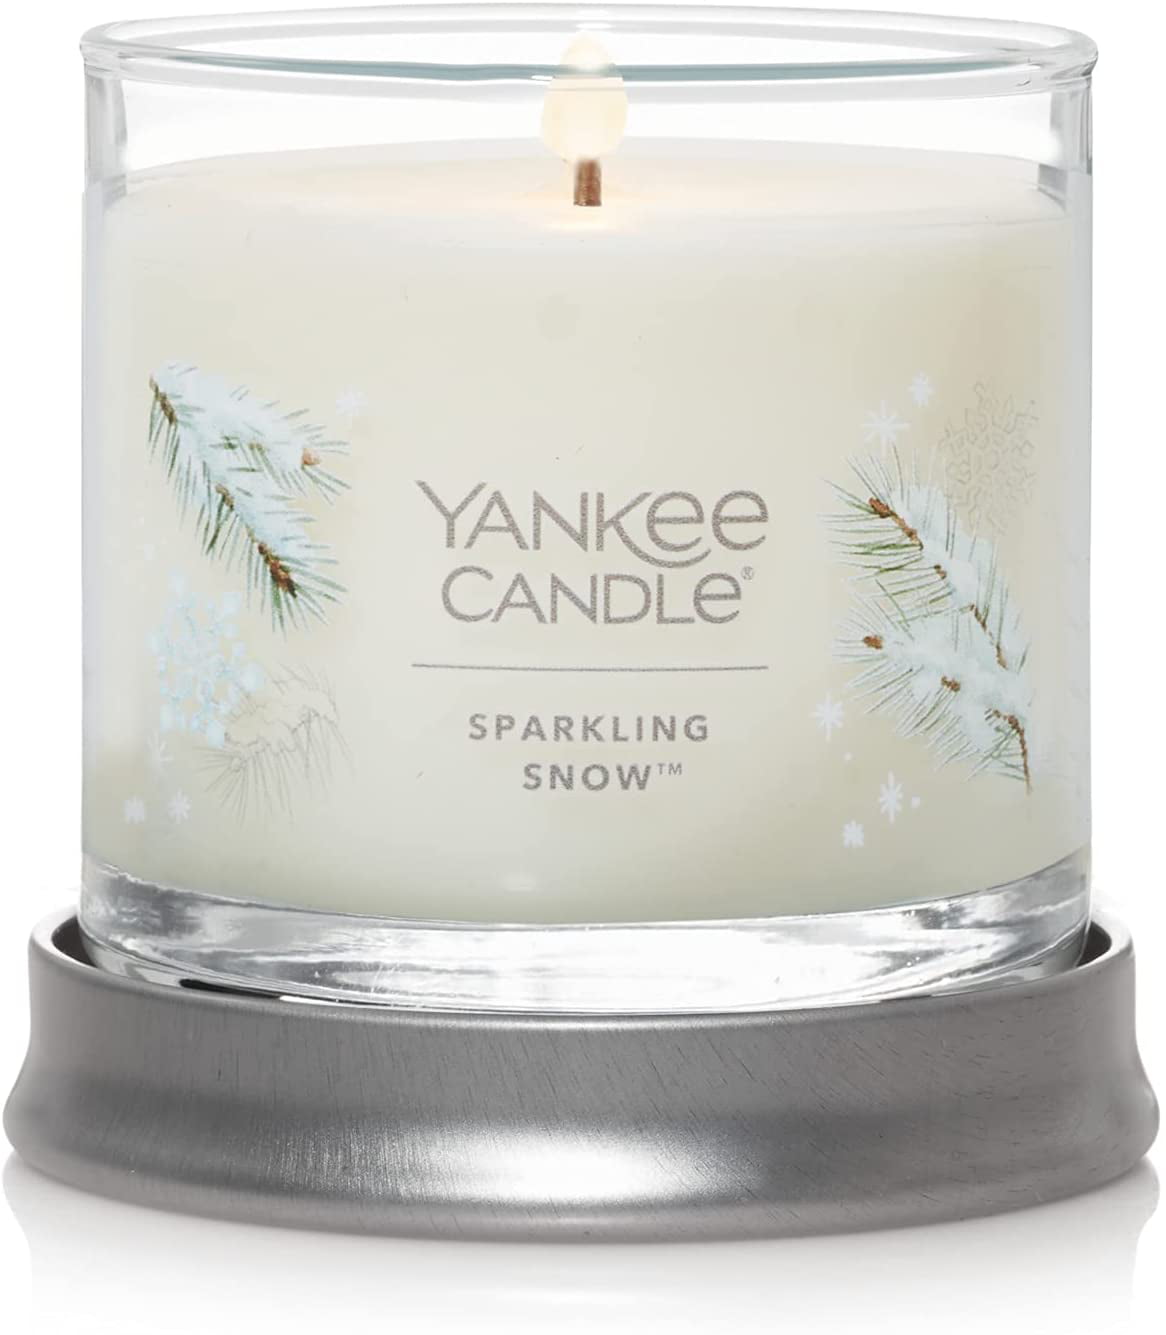 Yankee Candle “Sparkling Snow” Votive Candles HOLIDAY SCENT